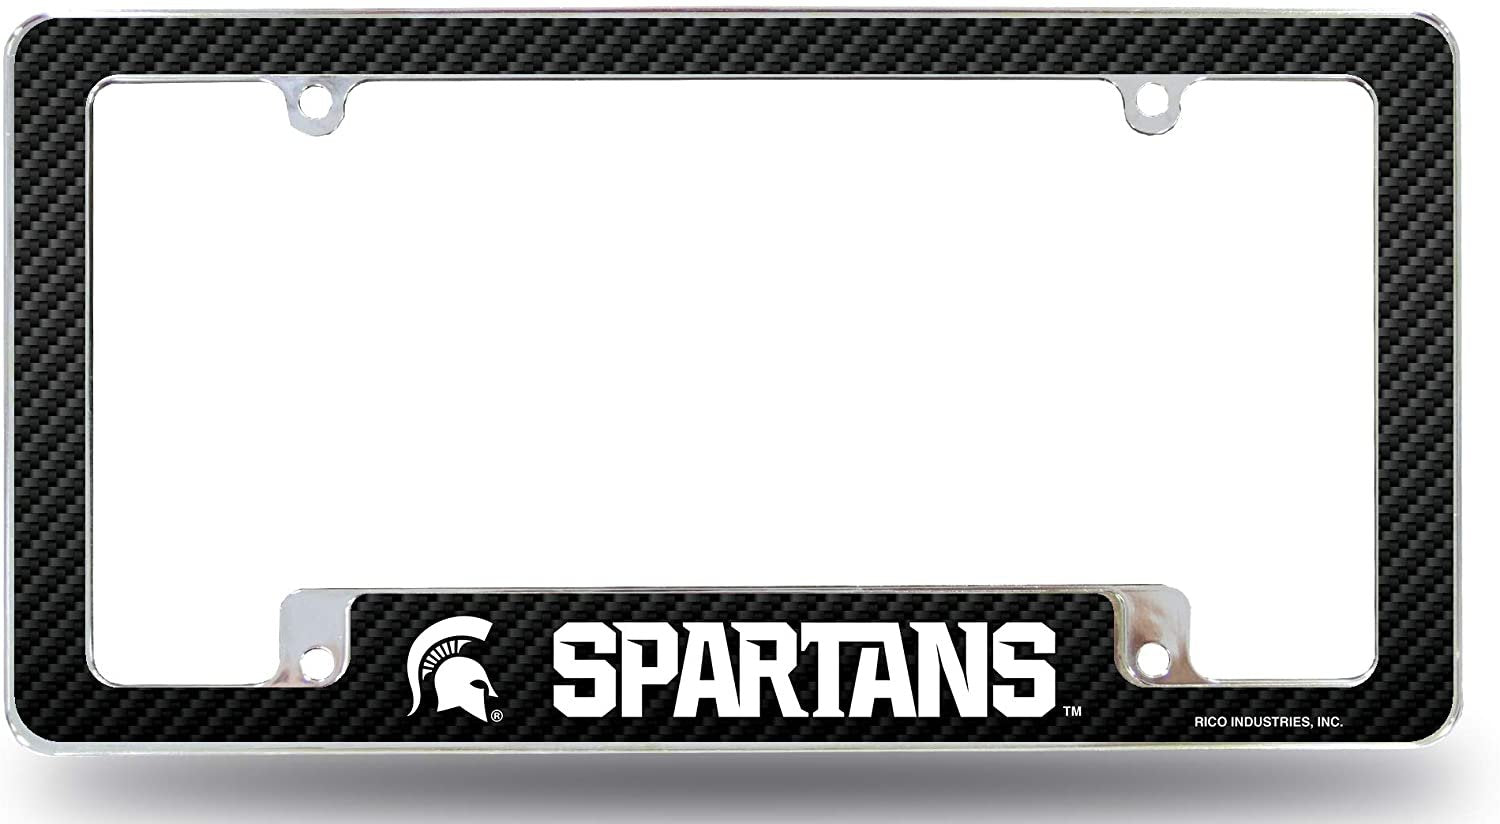 Michigan State University Spartans Metal License License Plate Frame Tag Cover, Carbon Fiber Style, 12x6 Inch